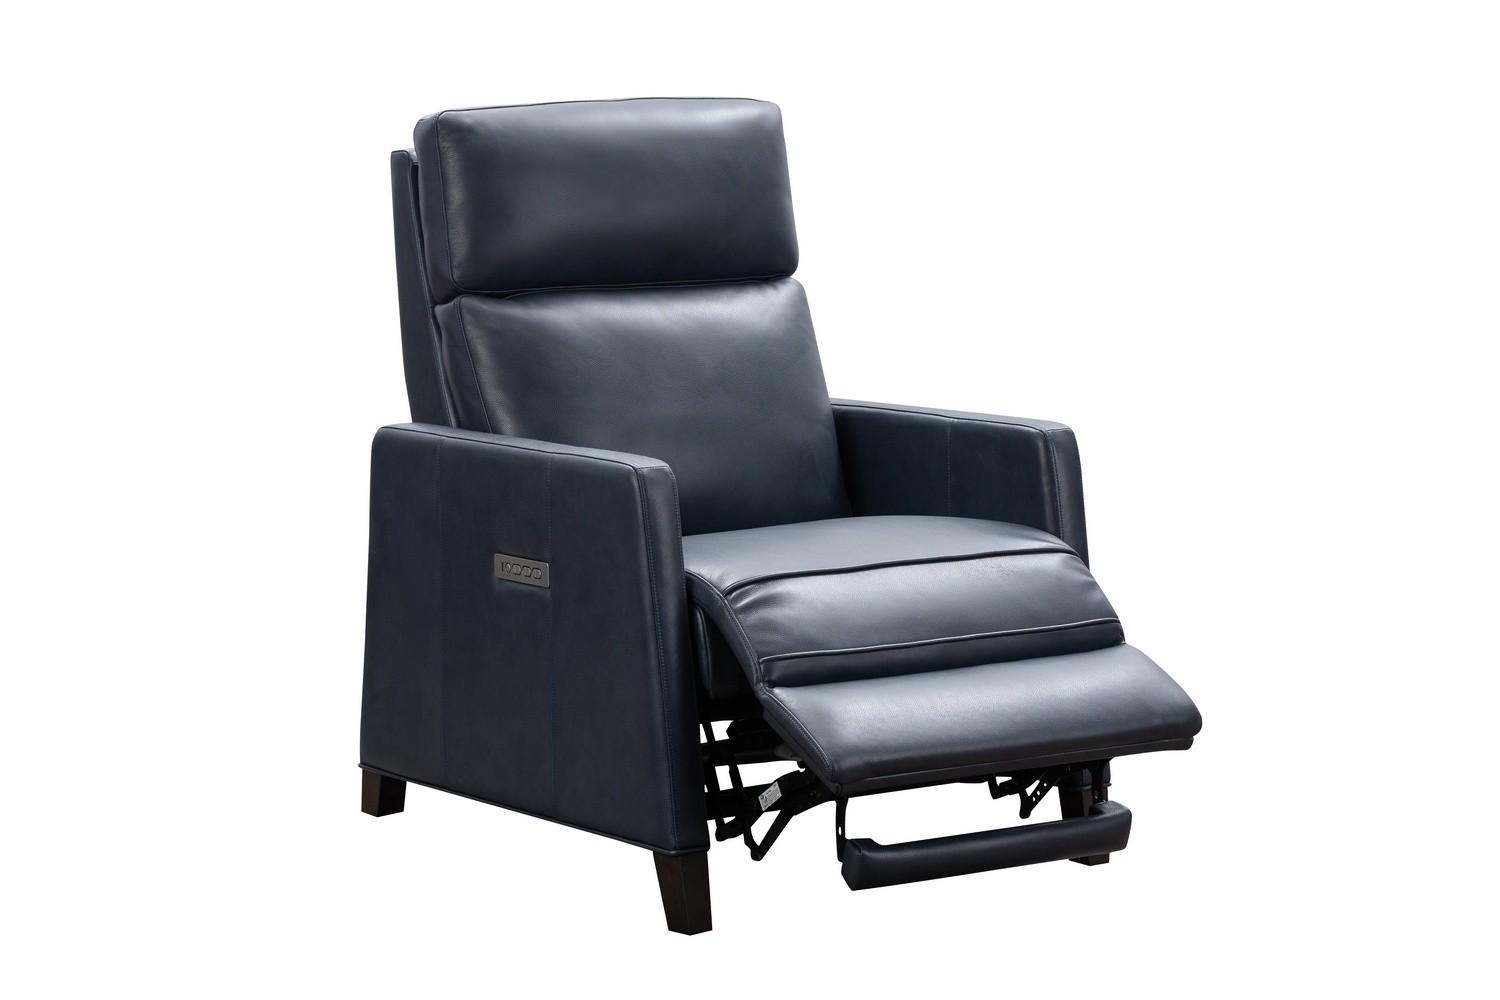 Barcalounger James Zero Gravity Power Recliner Chair with Power Head Rest and Lumbar - Barone Navy Blue/All Leather